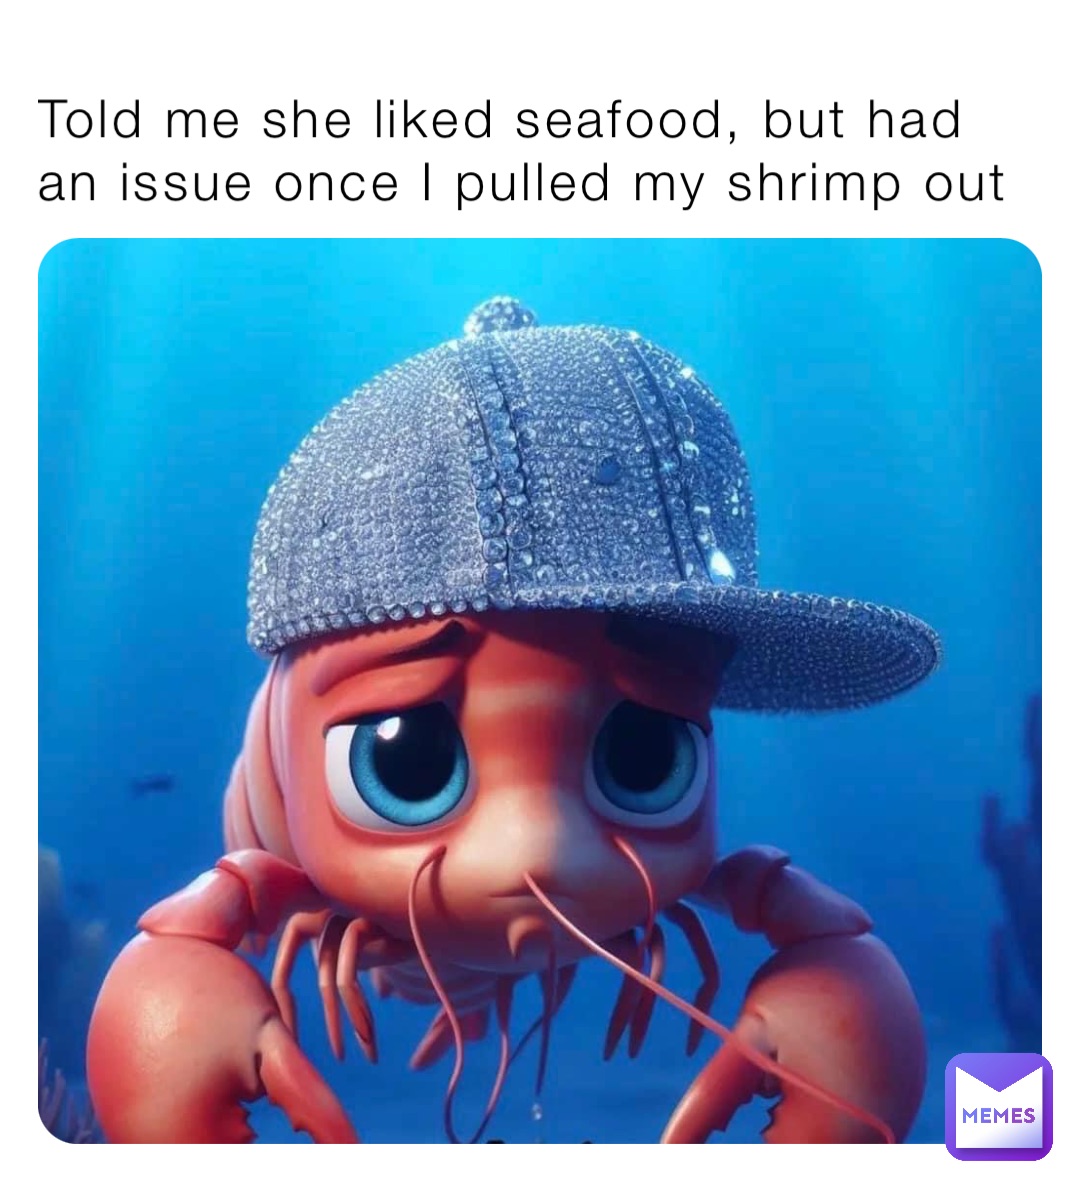 Told me she liked seafood, but had an issue once I pulled my shrimp out